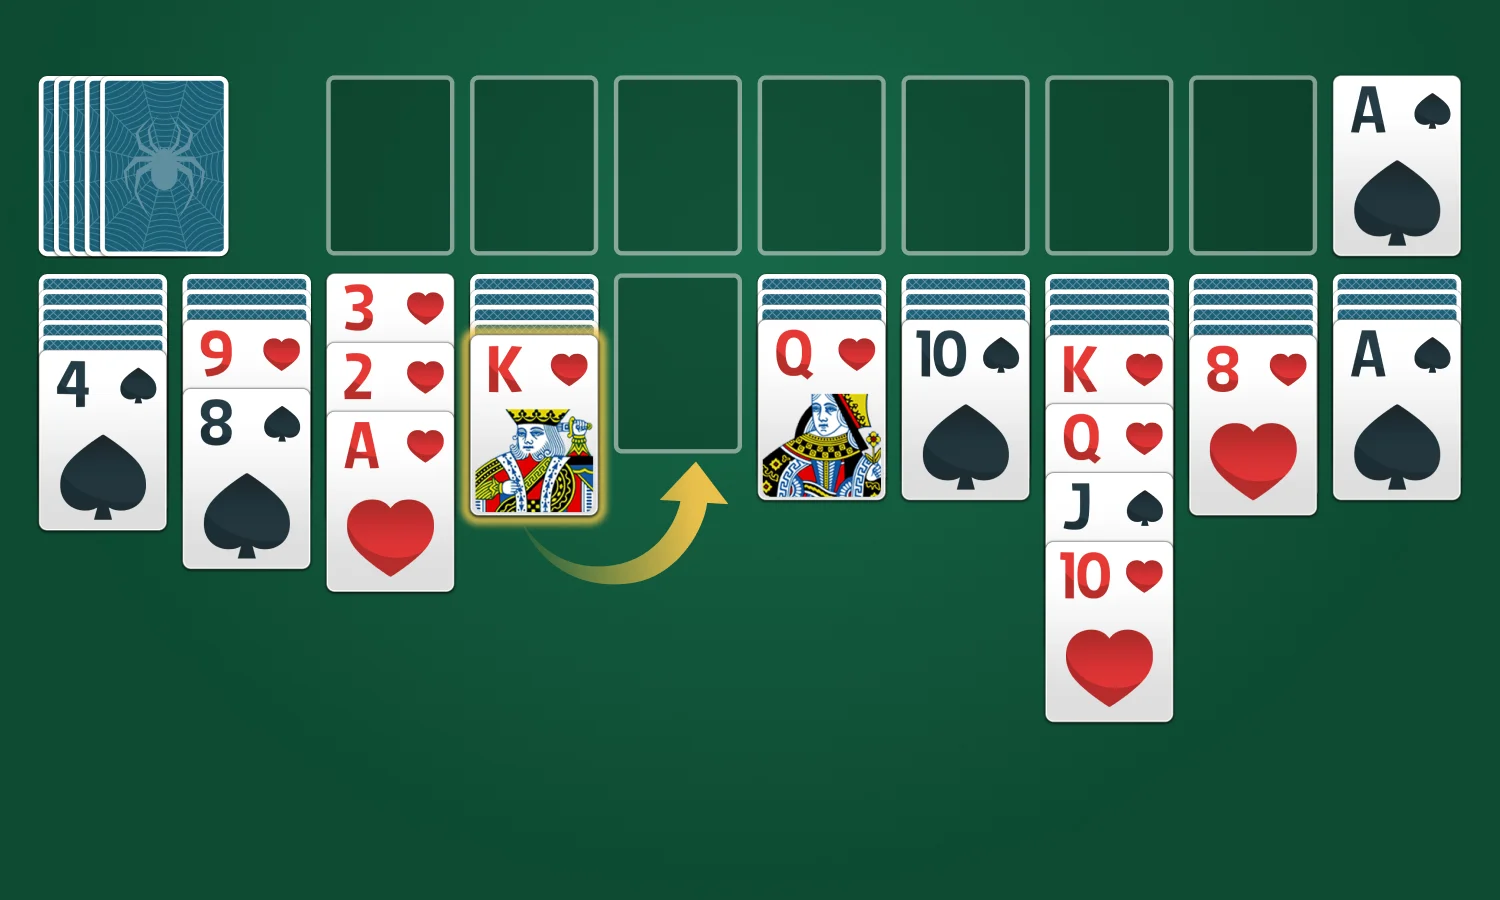 Spider Solitaire Rules: Fill an Empty Column